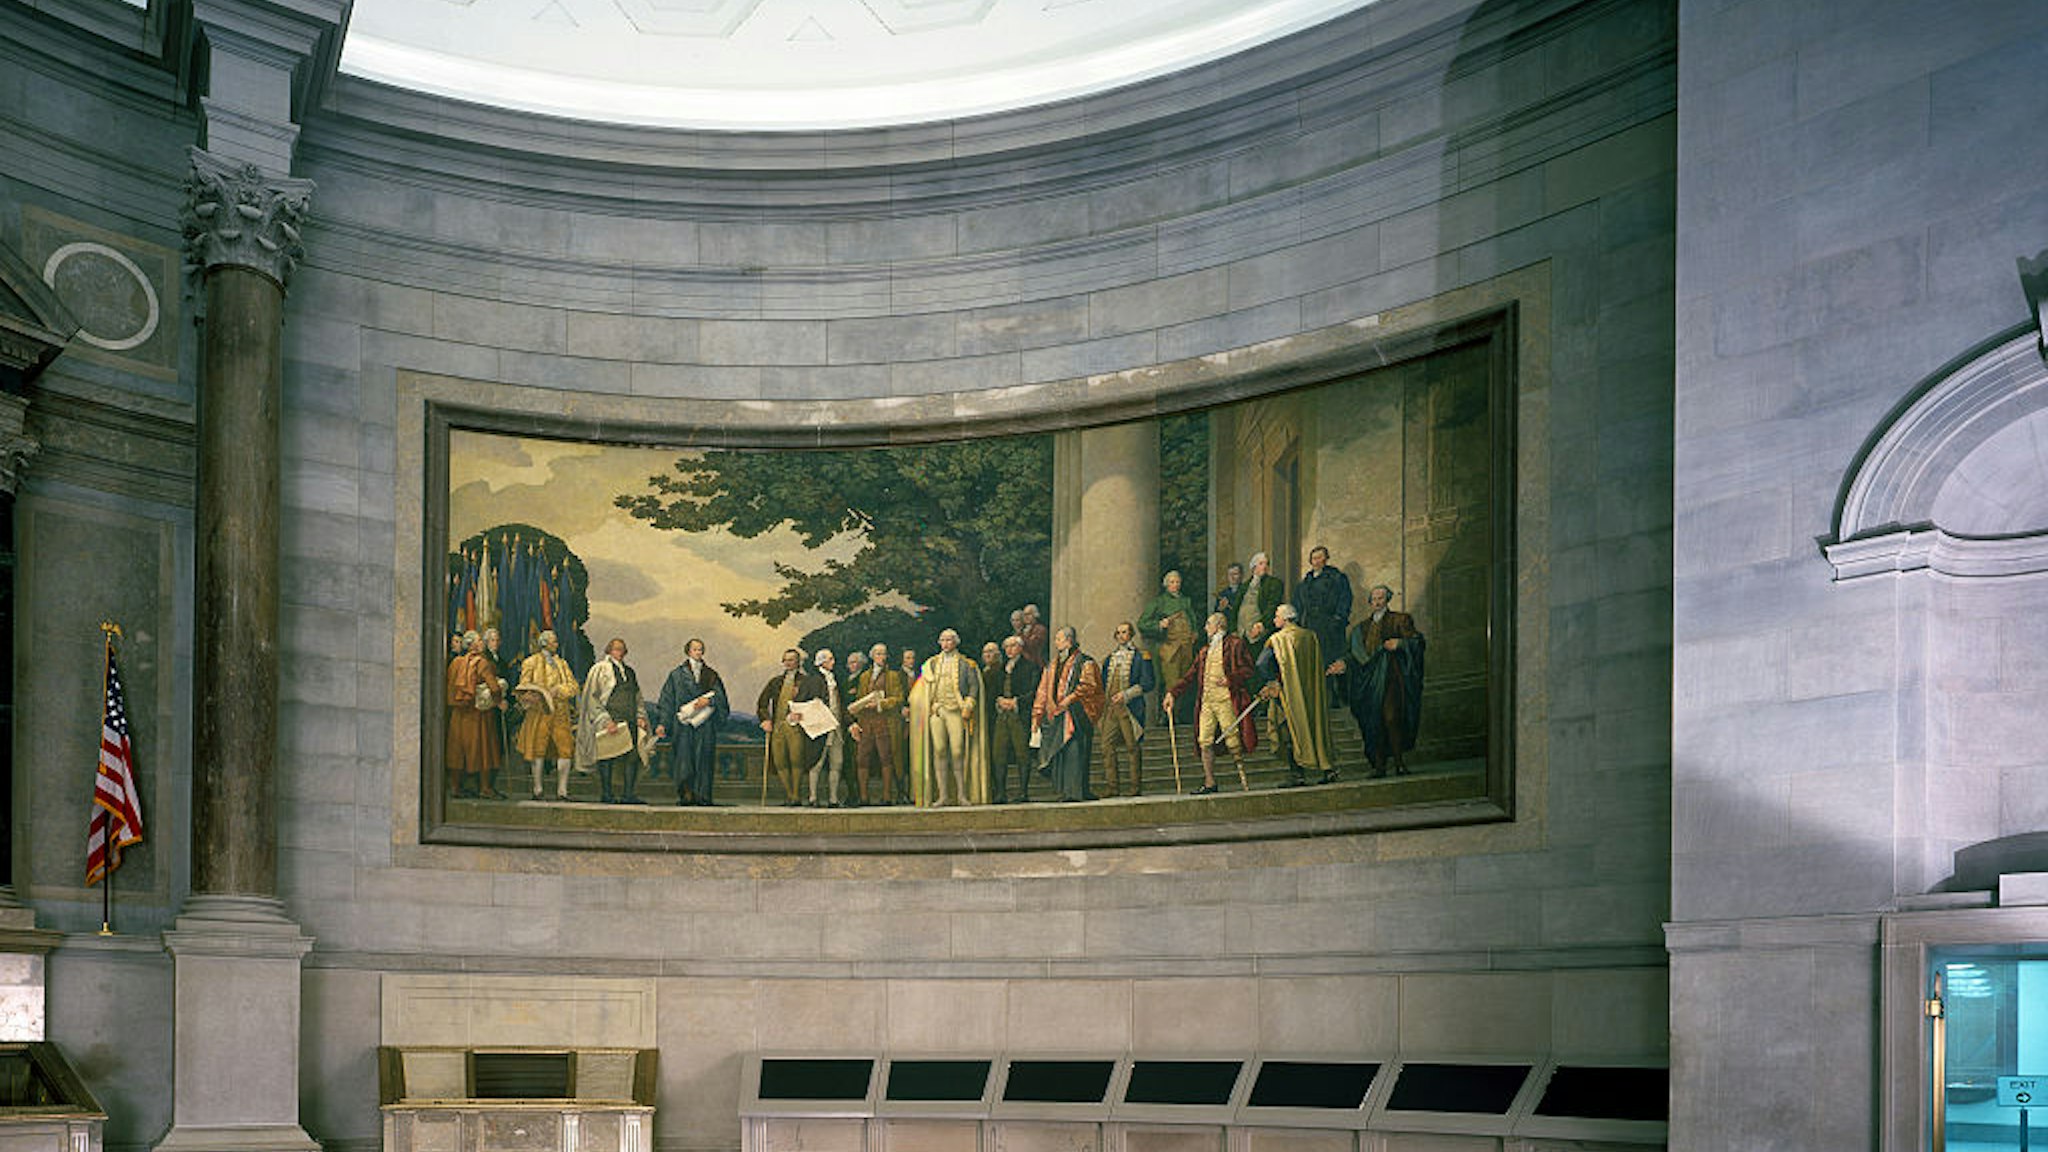 Barry Faulkner 1936 Constitution mural in the rotunda of the National Archives, Washington, D.C.